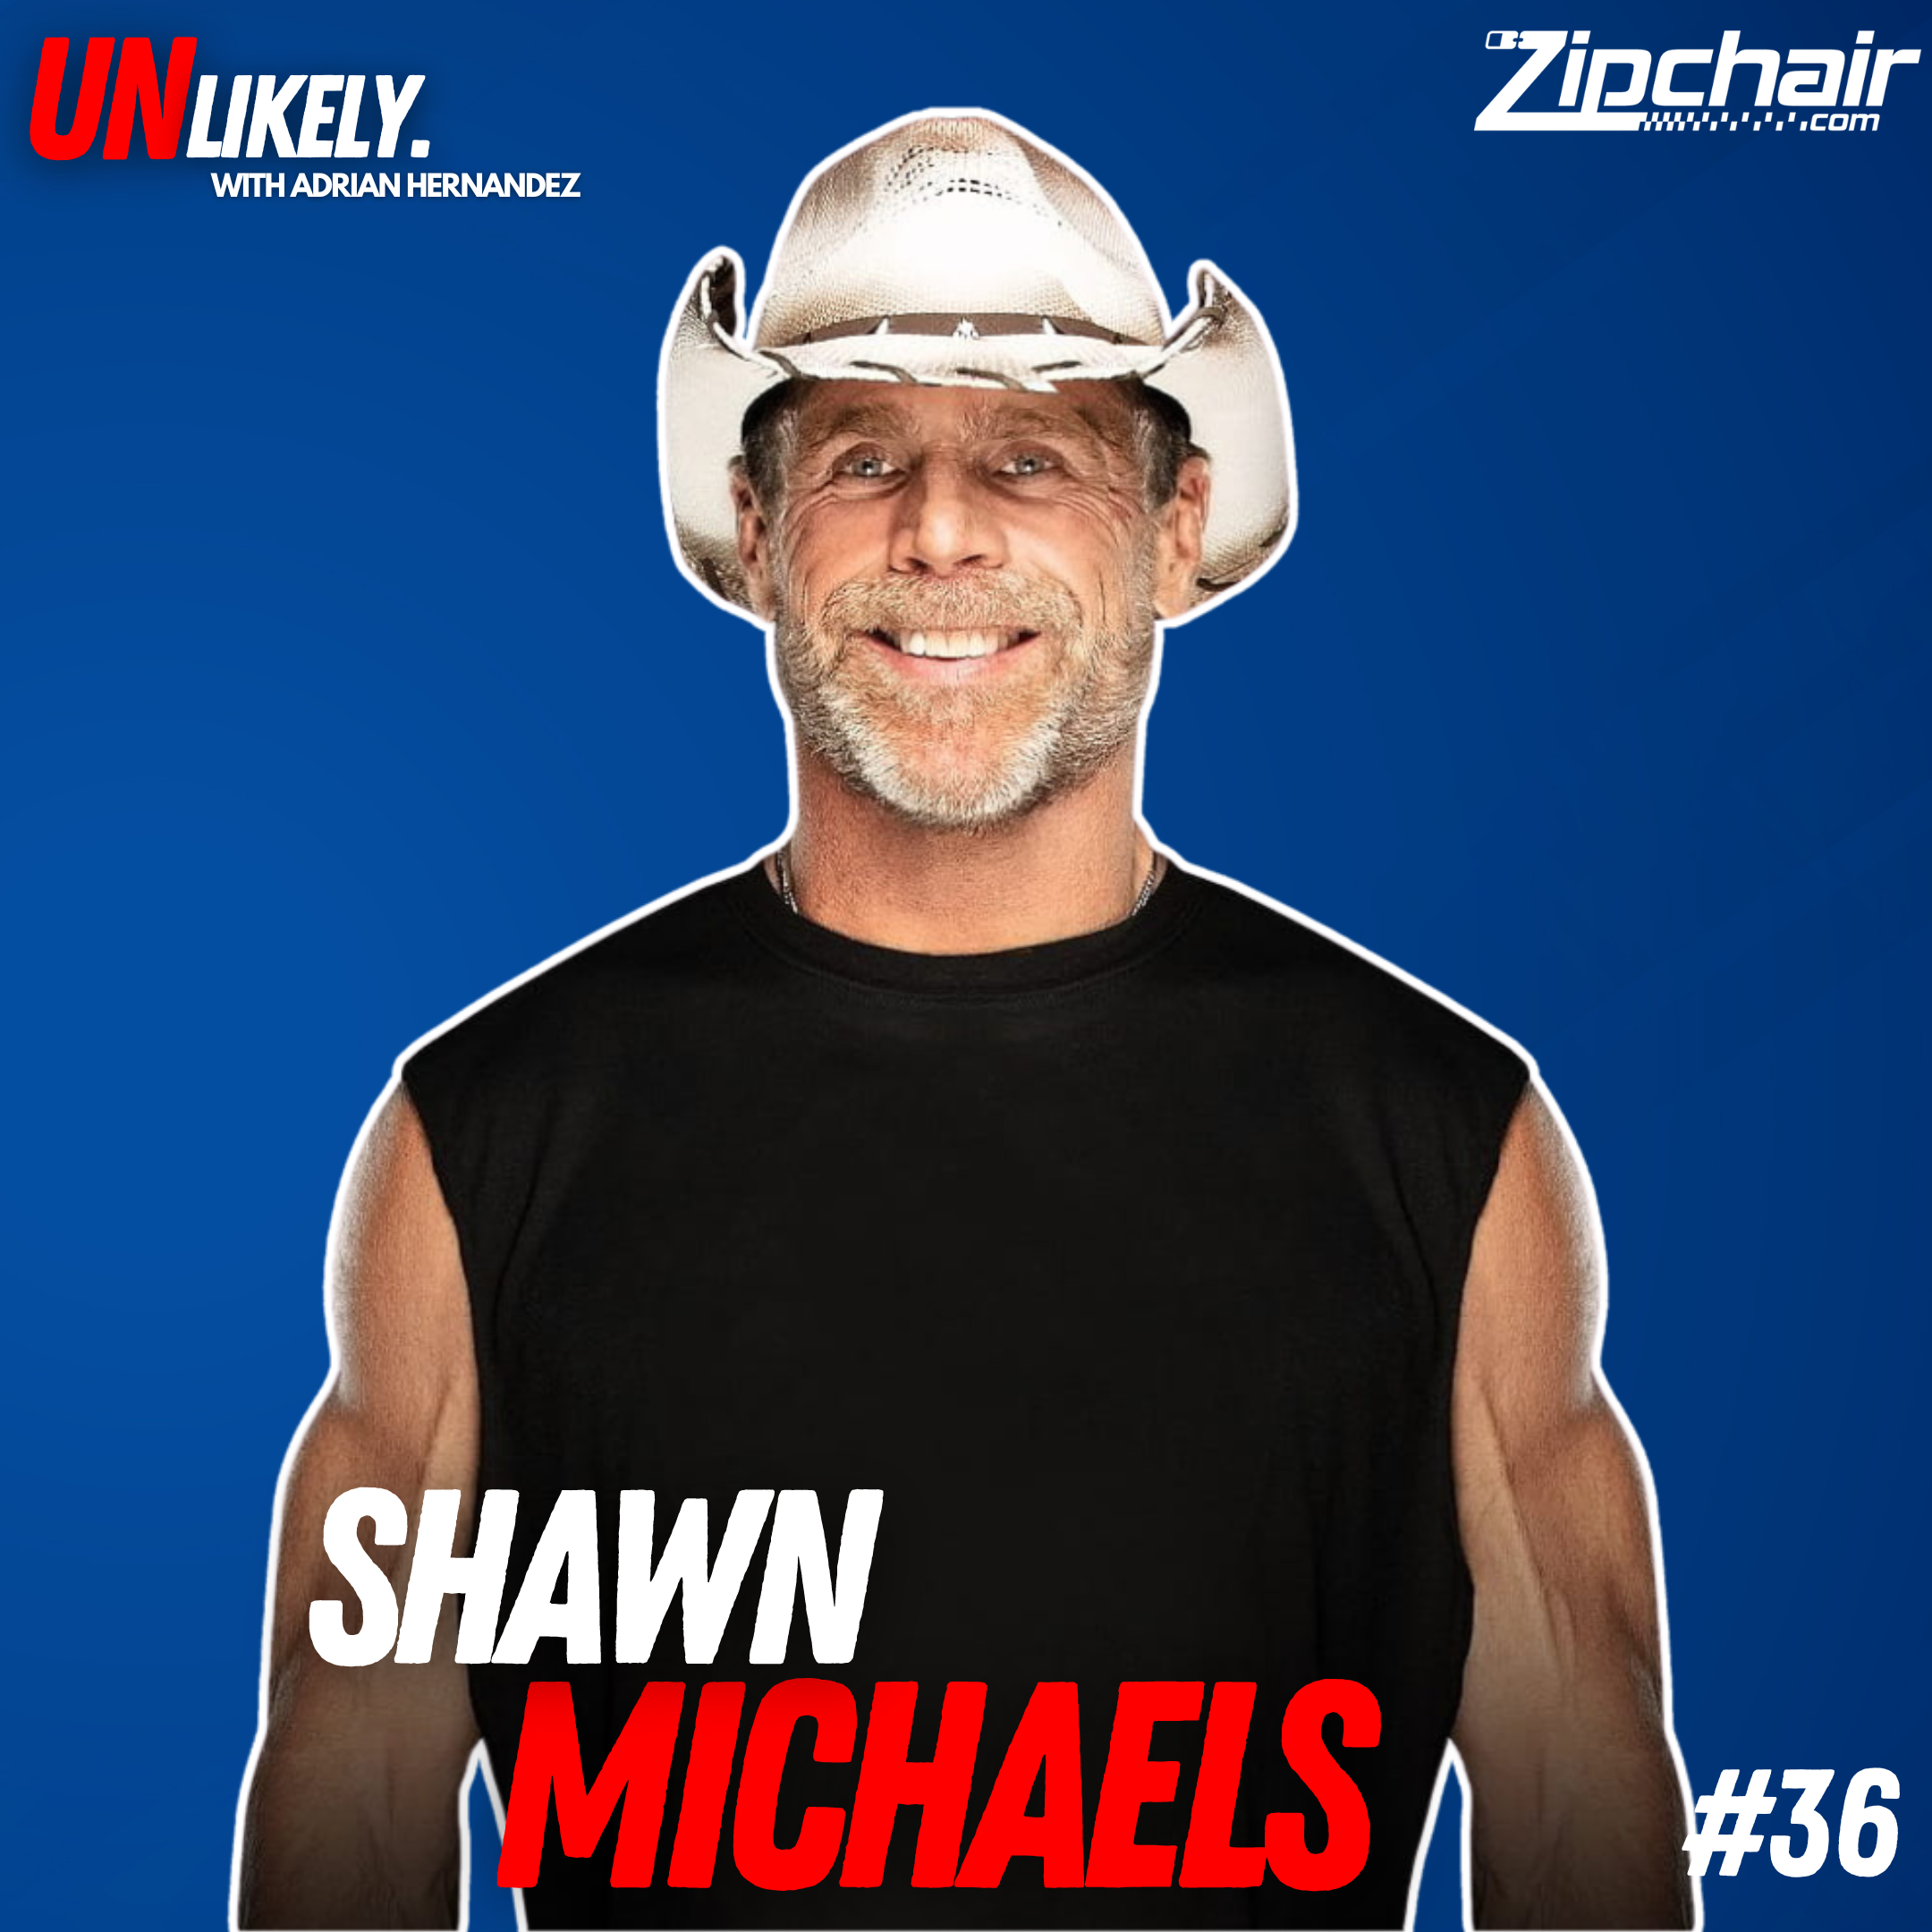 SPECIAL: Adrian's Unlikely Podcast Episode w/Shawn Michaels